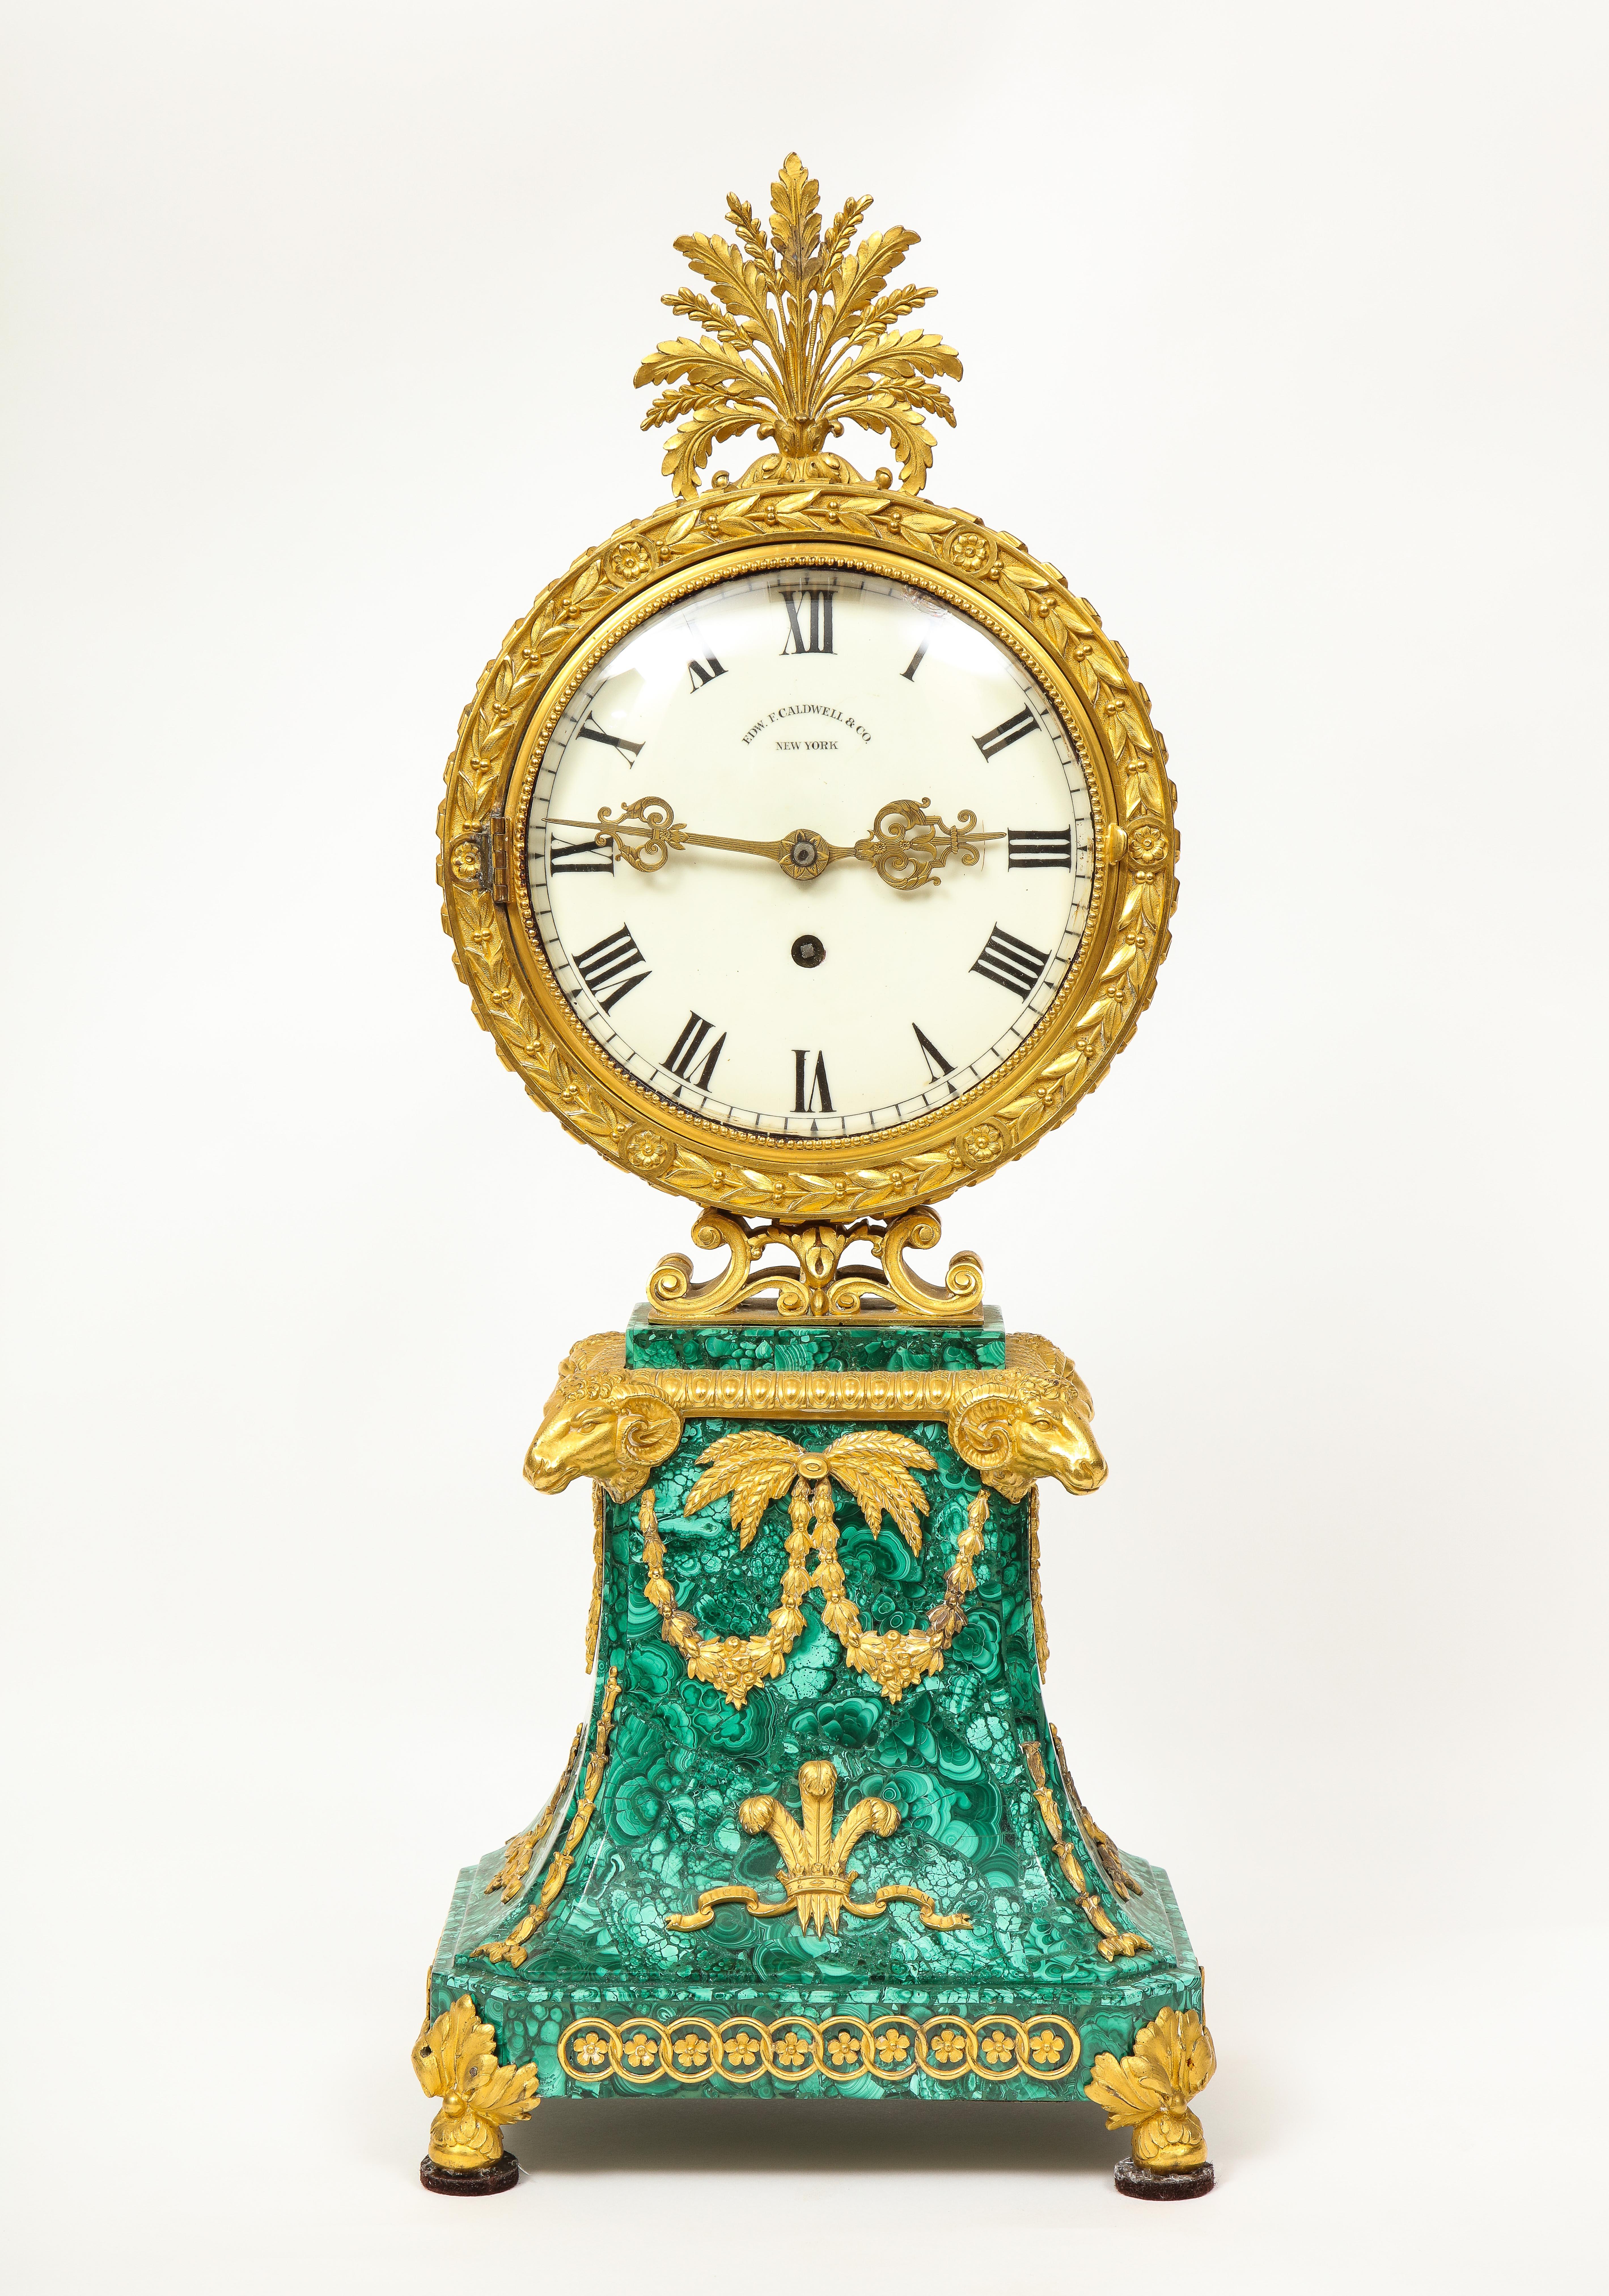 Edward F. Caldwell, An Extremely Fine and Rare Ormolu-Mounted Malachite Clock For Sale 9